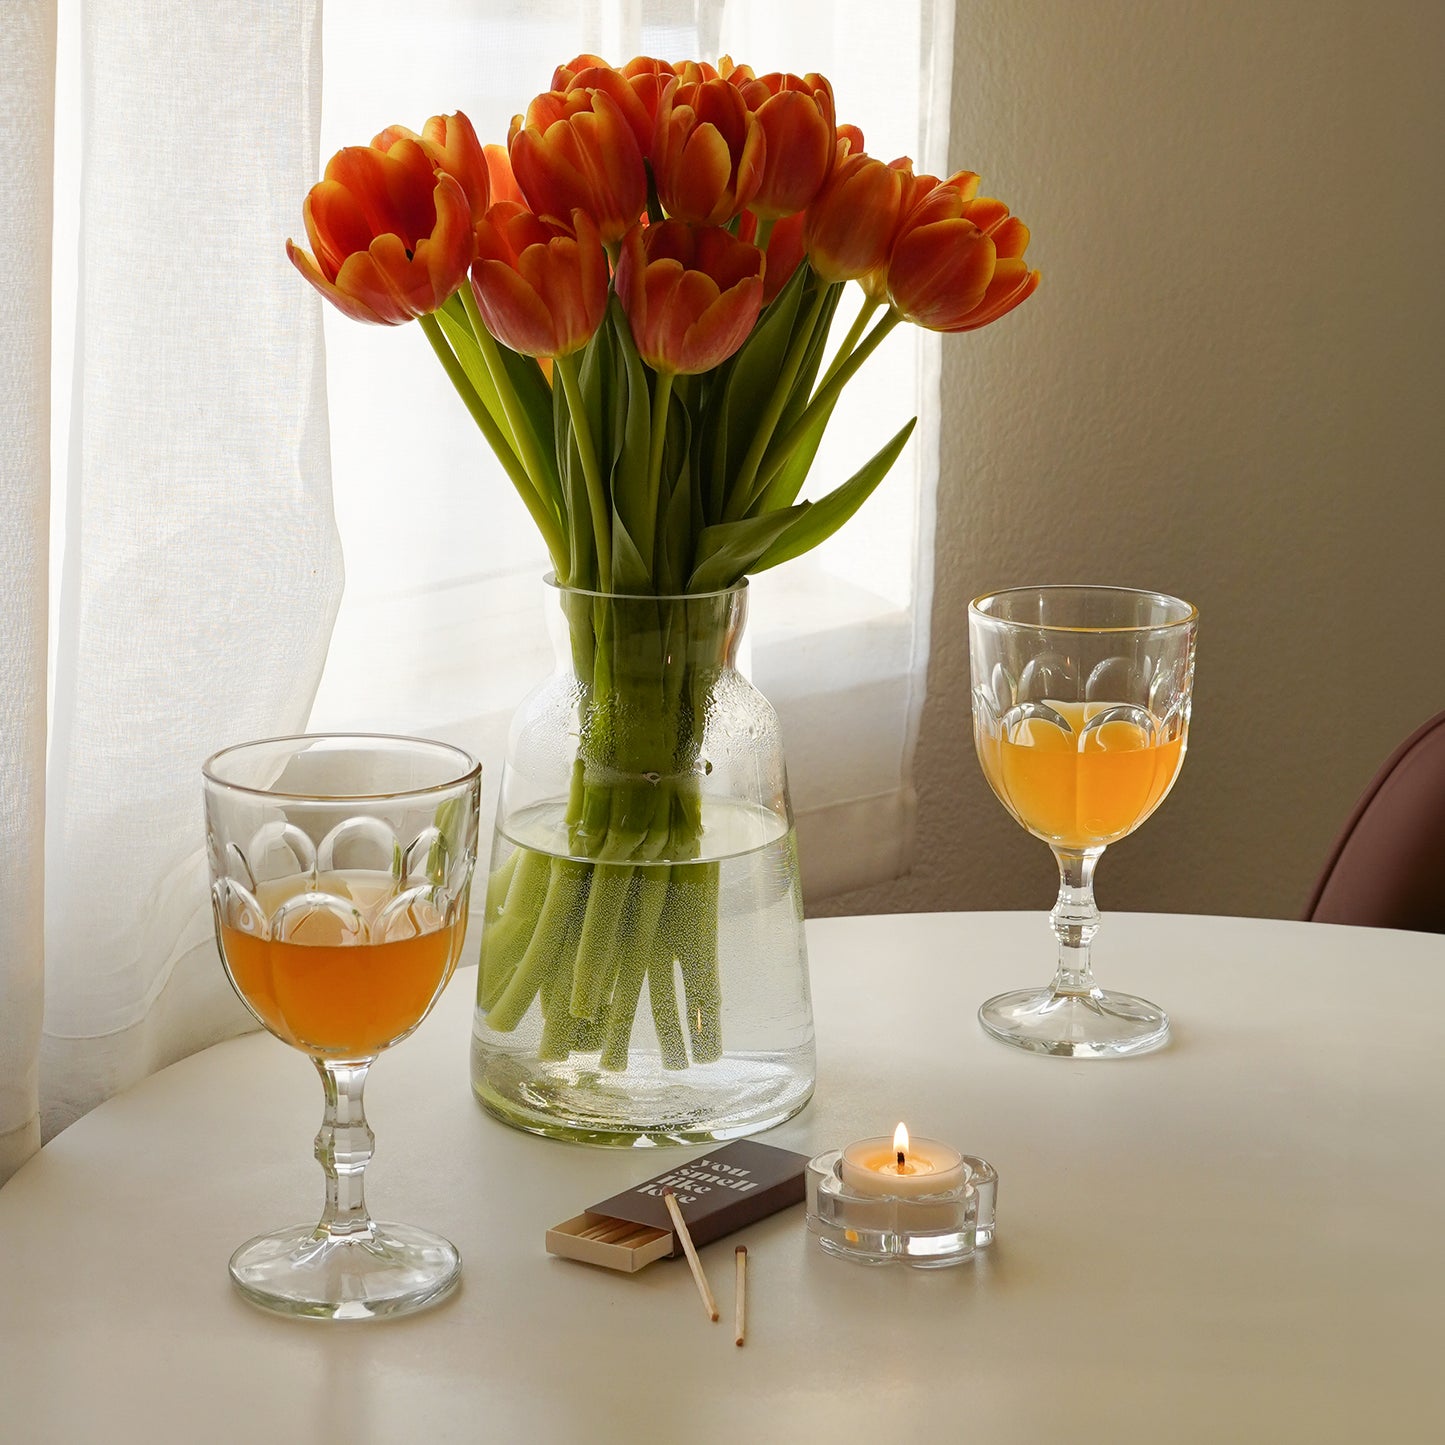 a lit tealight candle in a clear daisy candle holder, brown matchbox,  glasses of orange wine, and tulips in a clear vase on white round table in an aesthetic room